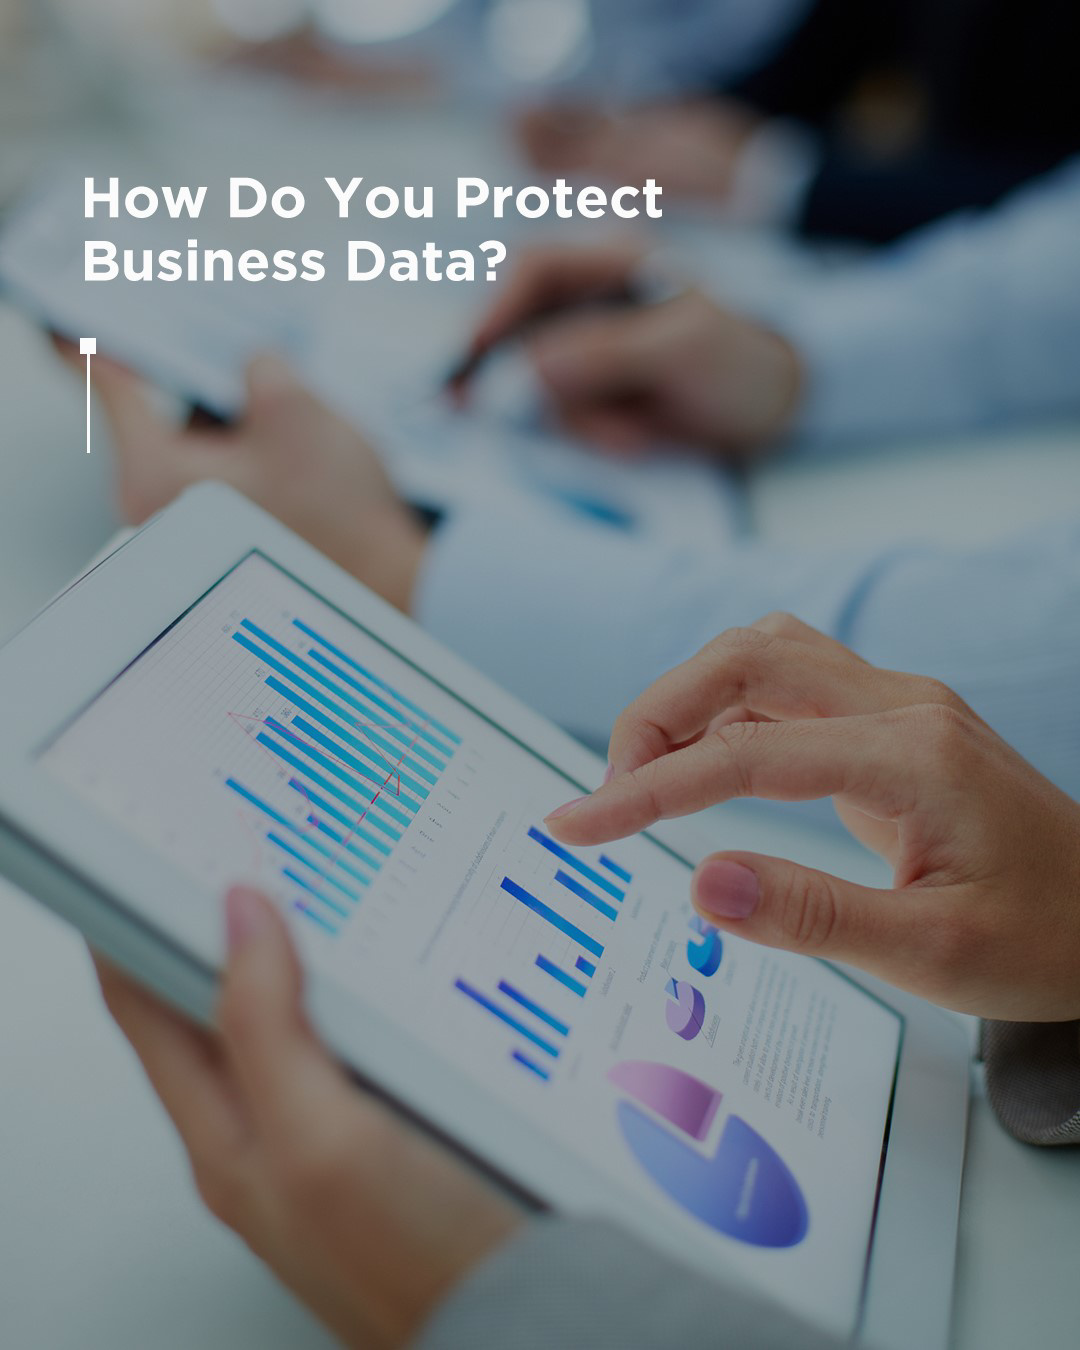 14 Ways to Protect Your Business [Download Infographic]